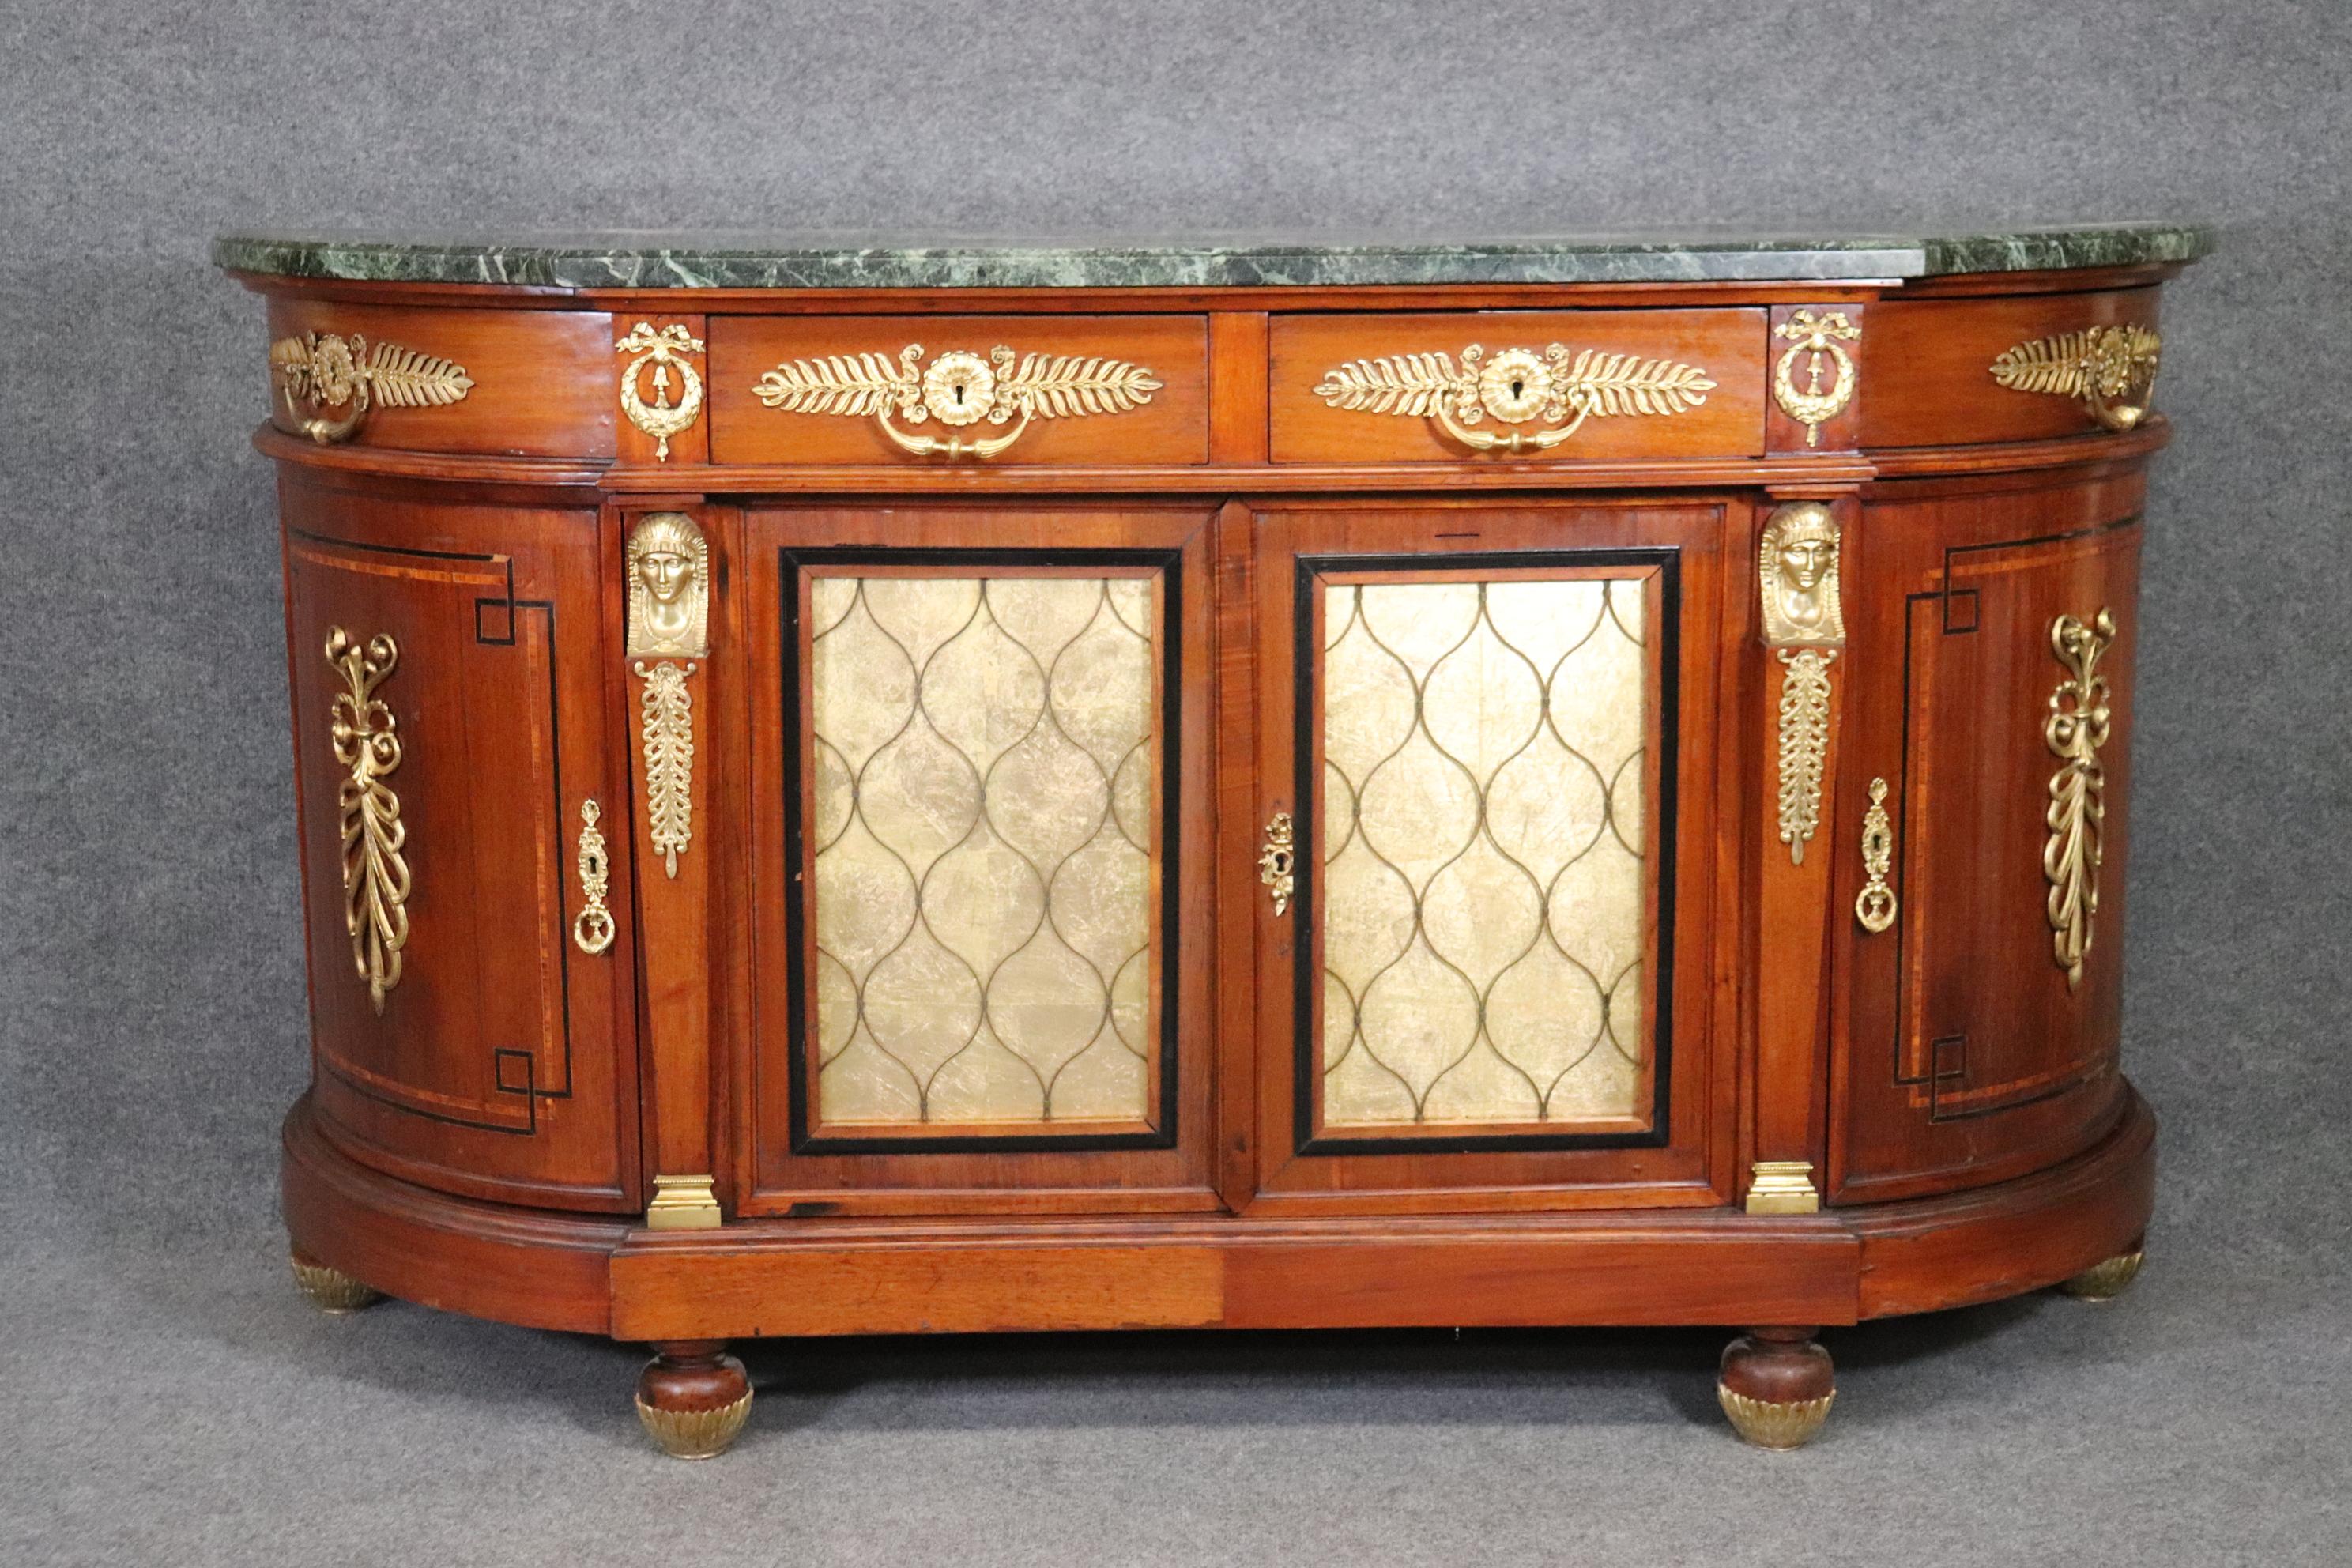 Empire Revival French Empire Style Bronze Mounted Marble Top Walnut Sideboard Eglomise Doors